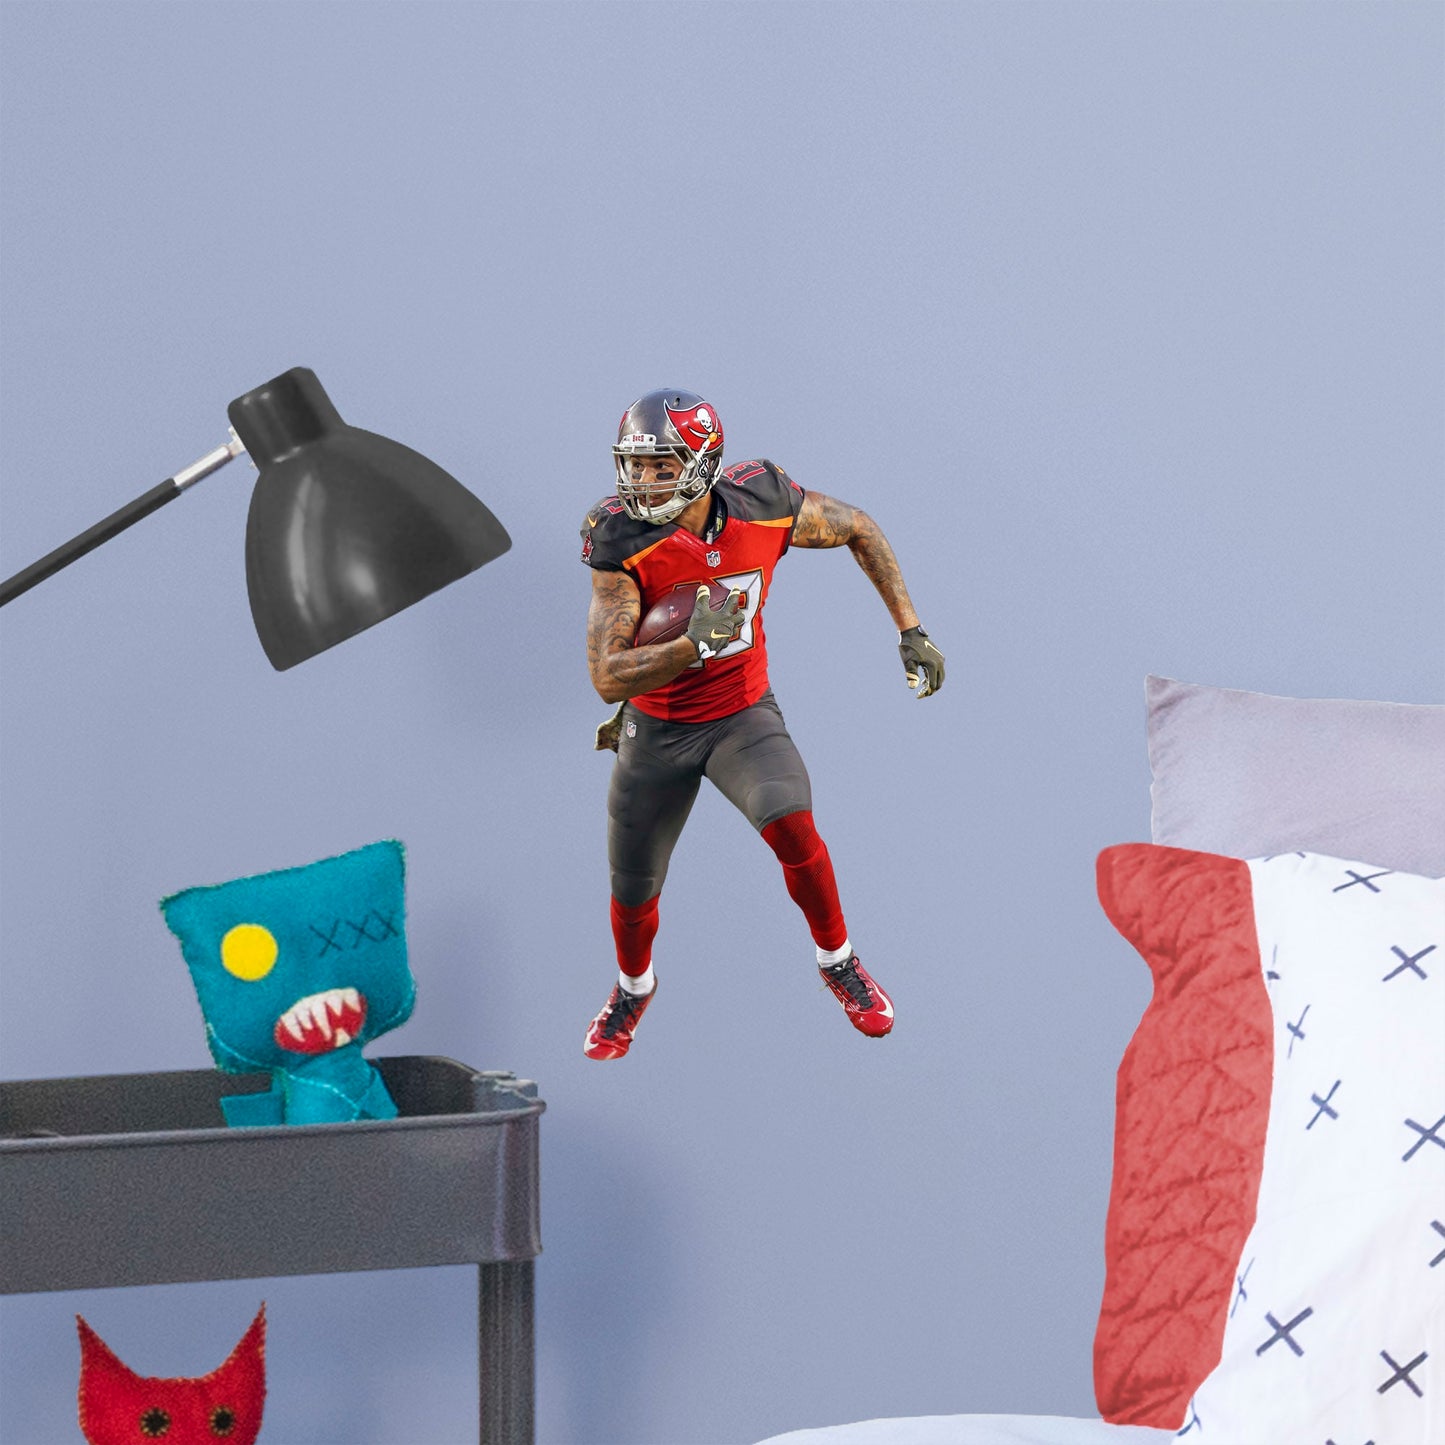 X-Large Athlete + 2 Decals (21"W x 39"H) Bring the action of the NFL into your home with a wall decal of Mike Evans! High quality, durable, and tear resistant, you'll be able to stick and move it as many times as you want to create the ultimate football experience in any room!